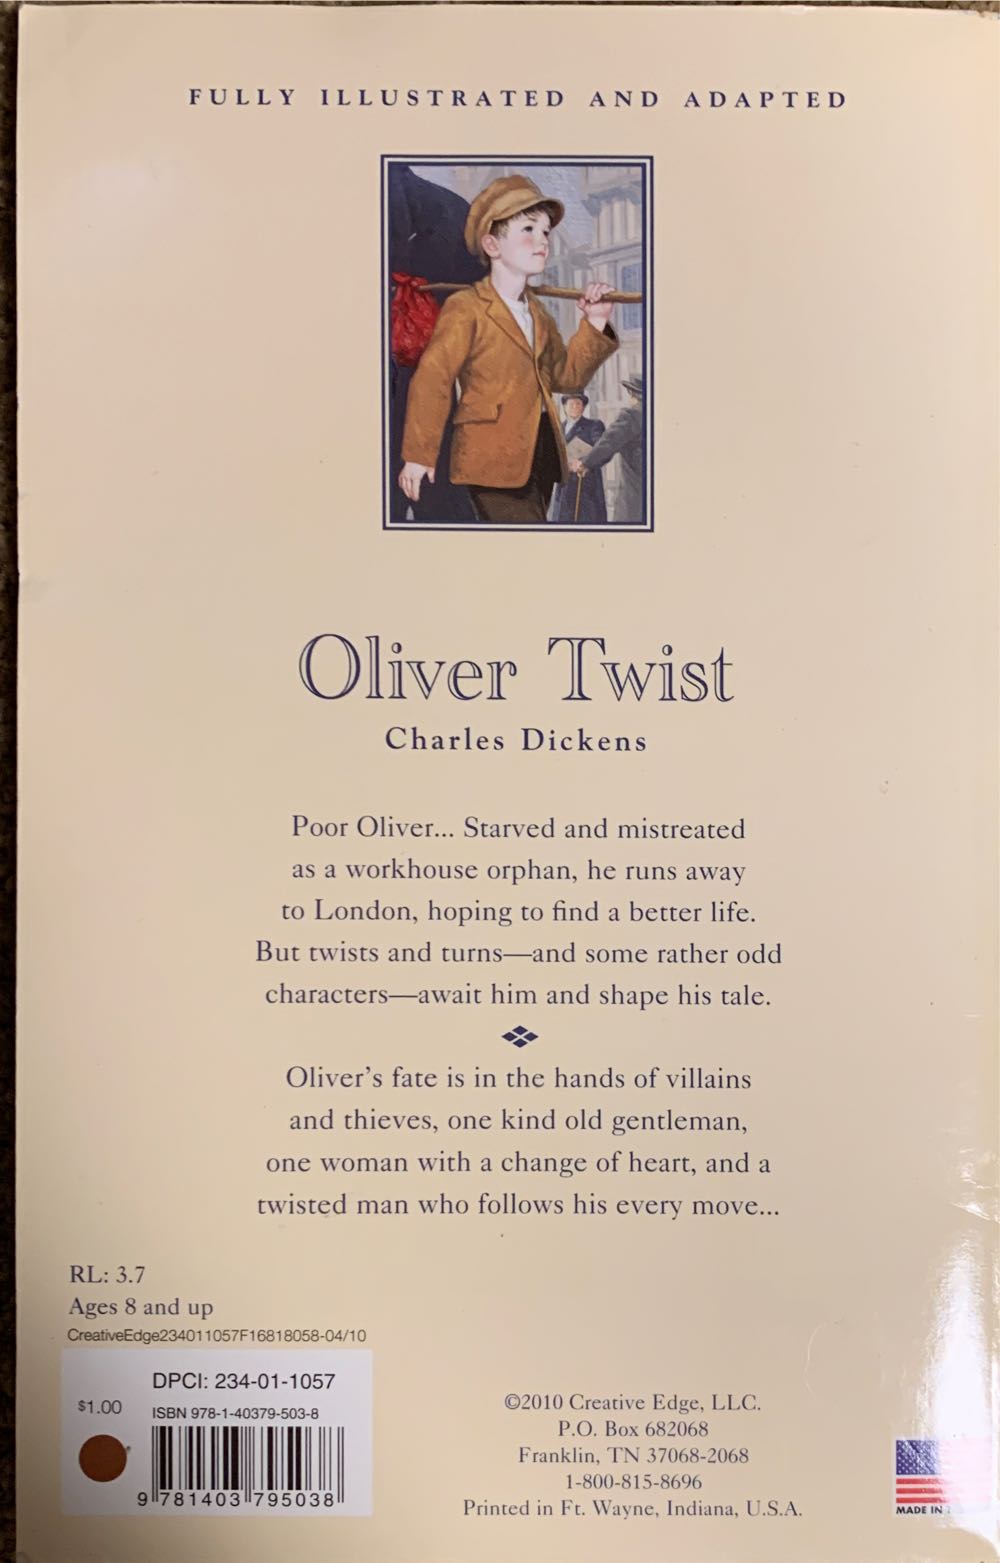 Oliver Twist - Charles Dickens (Dalmation Publishing Company - Paperback) book collectible [Barcode 9781403795038] - Main Image 2